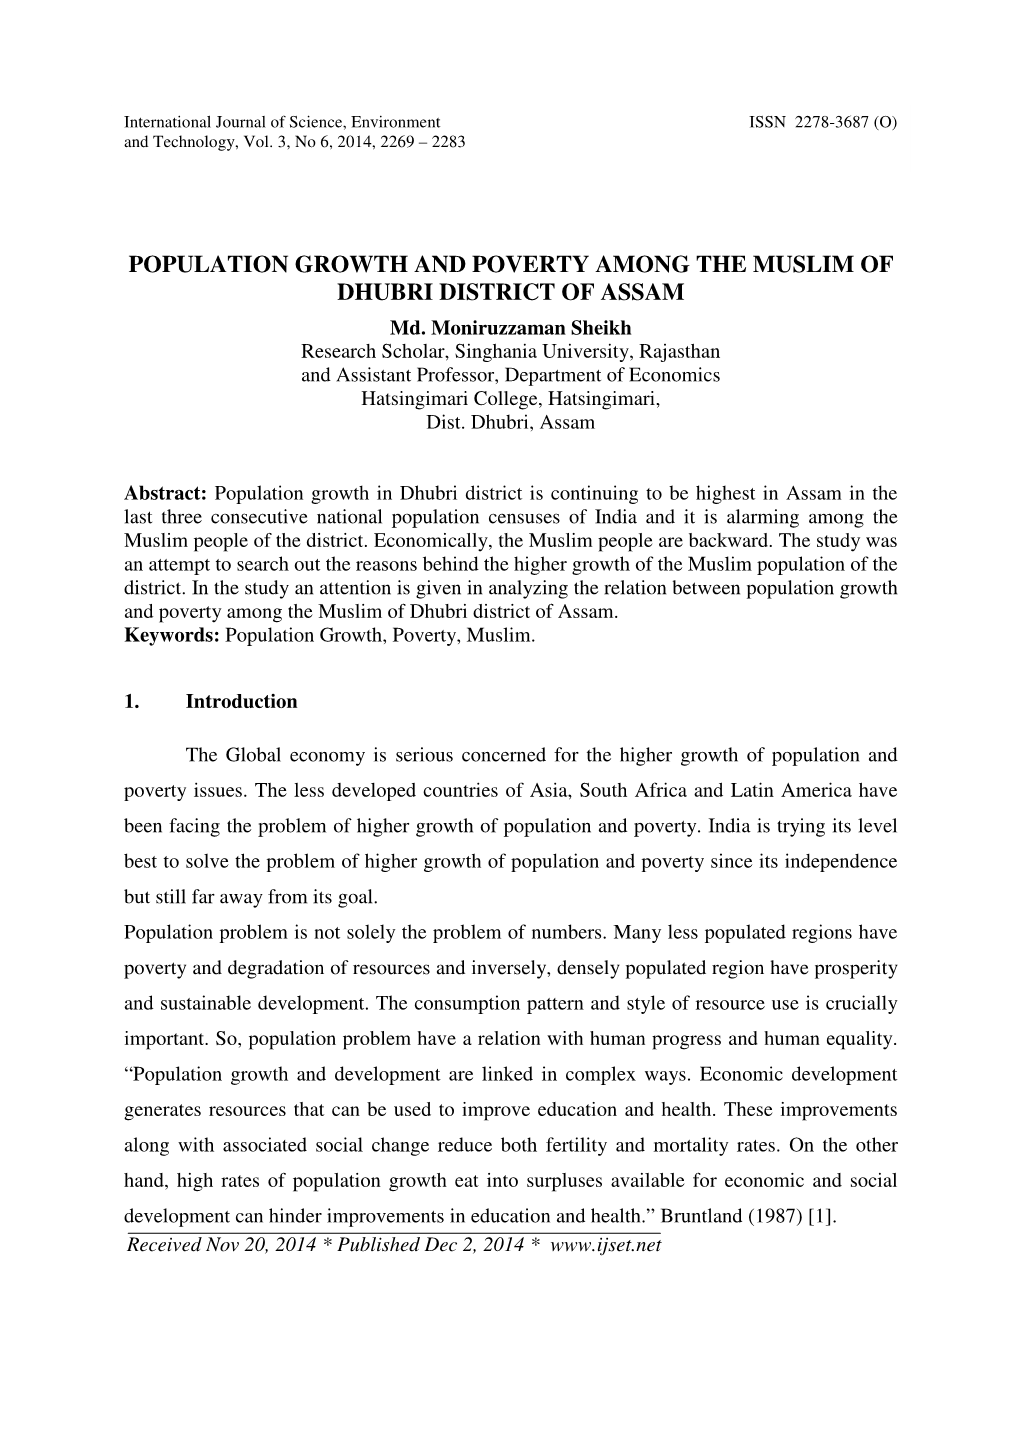 POPULATION GROWTH and POVERTY AMONG the MUSLIM of DHUBRI DISTRICT of ASSAM Md